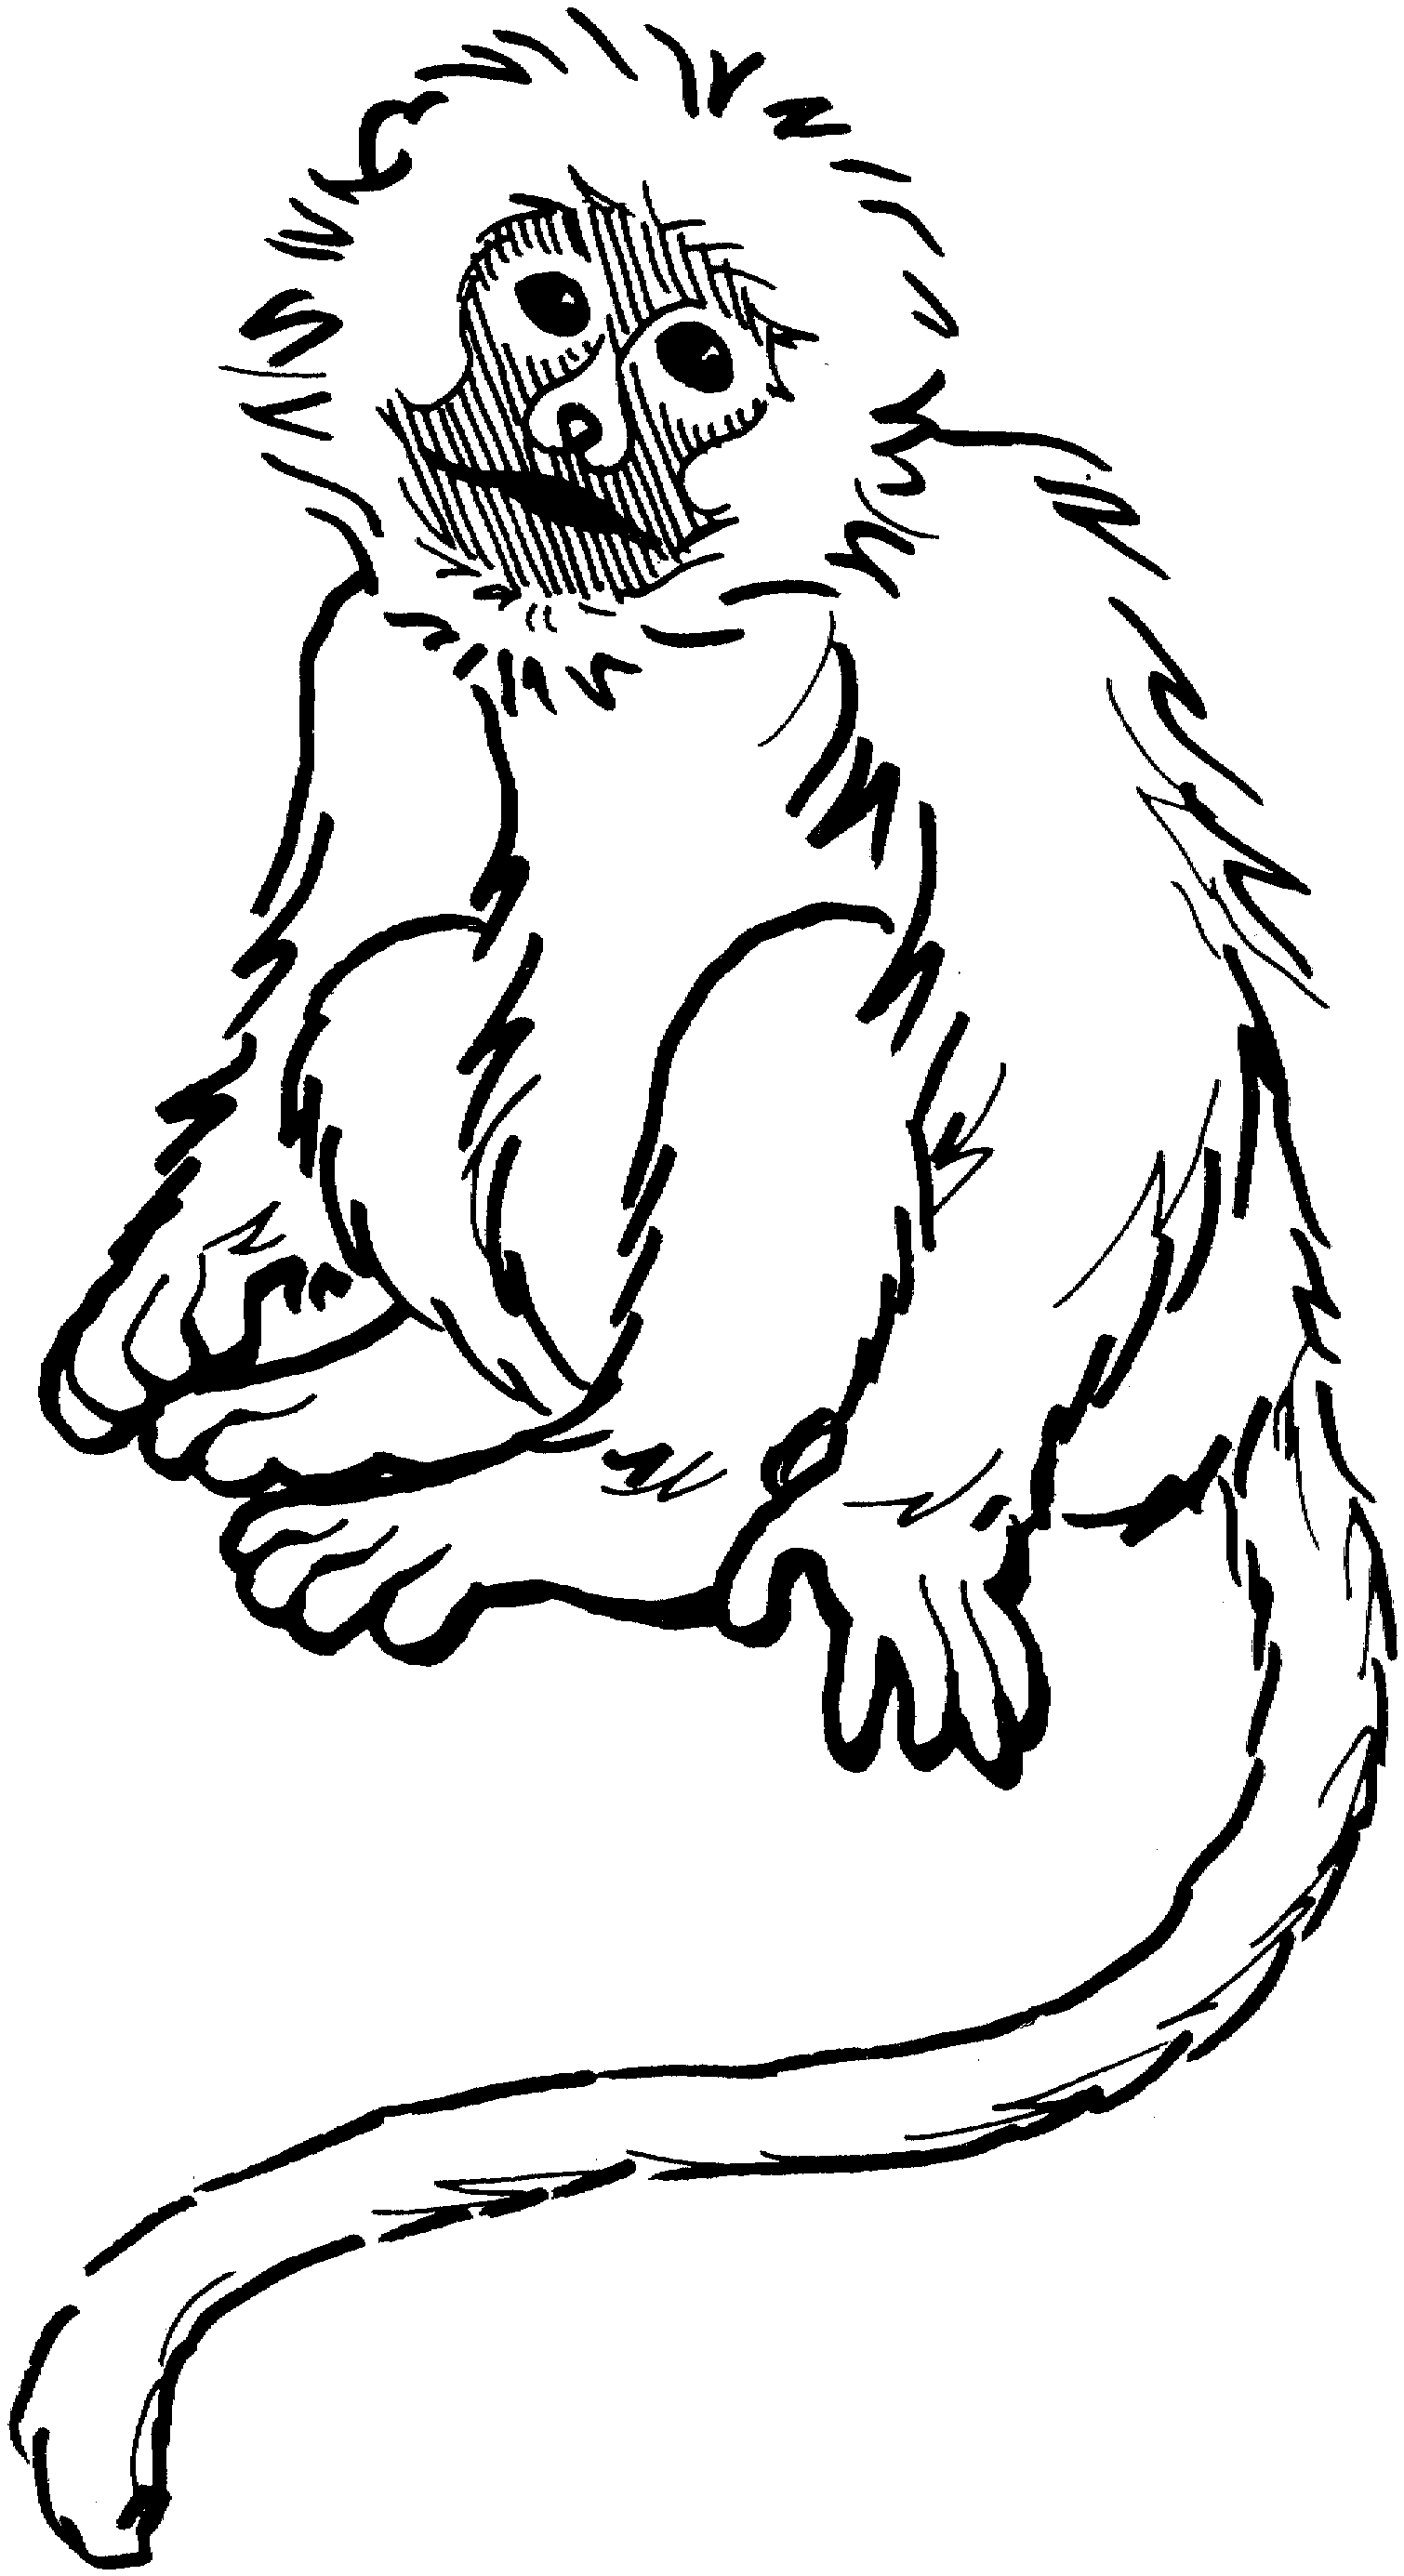 Spider Monkey coloring #1, Download drawings